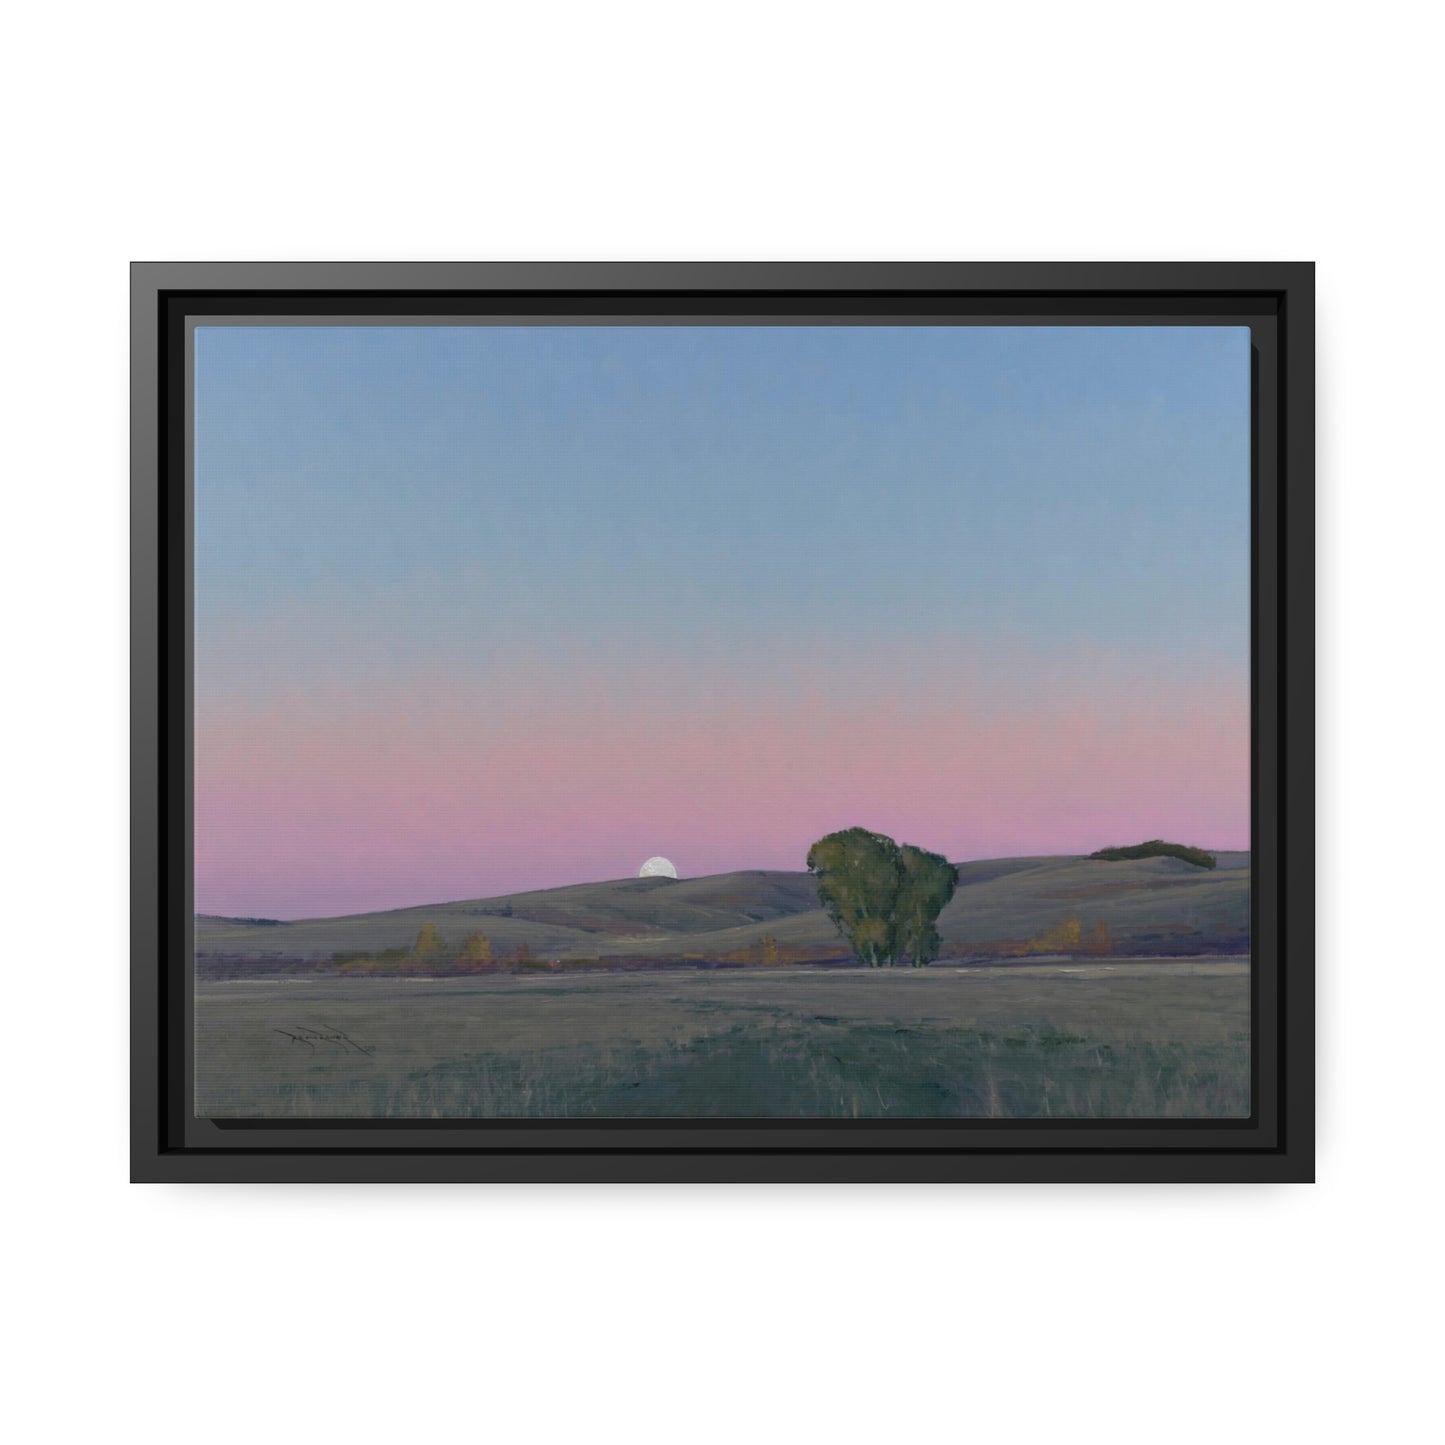 Ben Bauer: "Moonrise in Lowry, MN" - Framed Canvas Reproduction